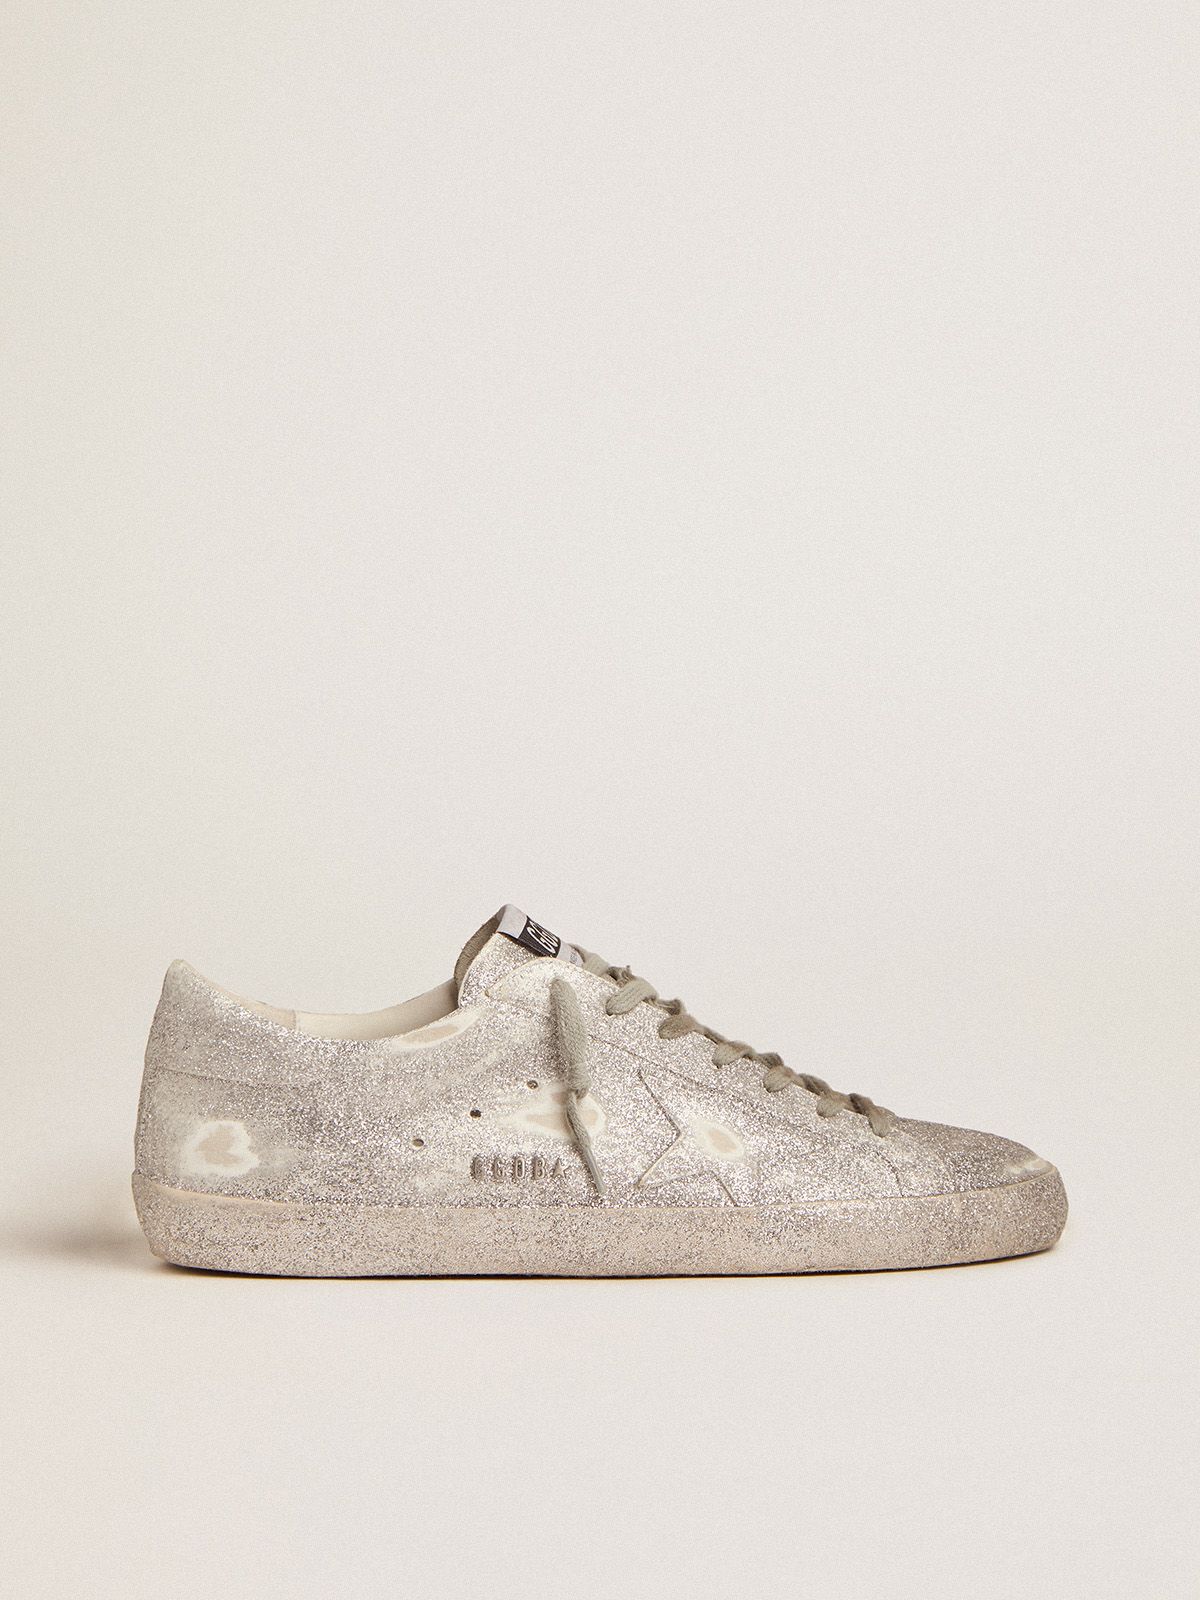 Super-Star sneakers in silver leather with all-over glitter finish | 